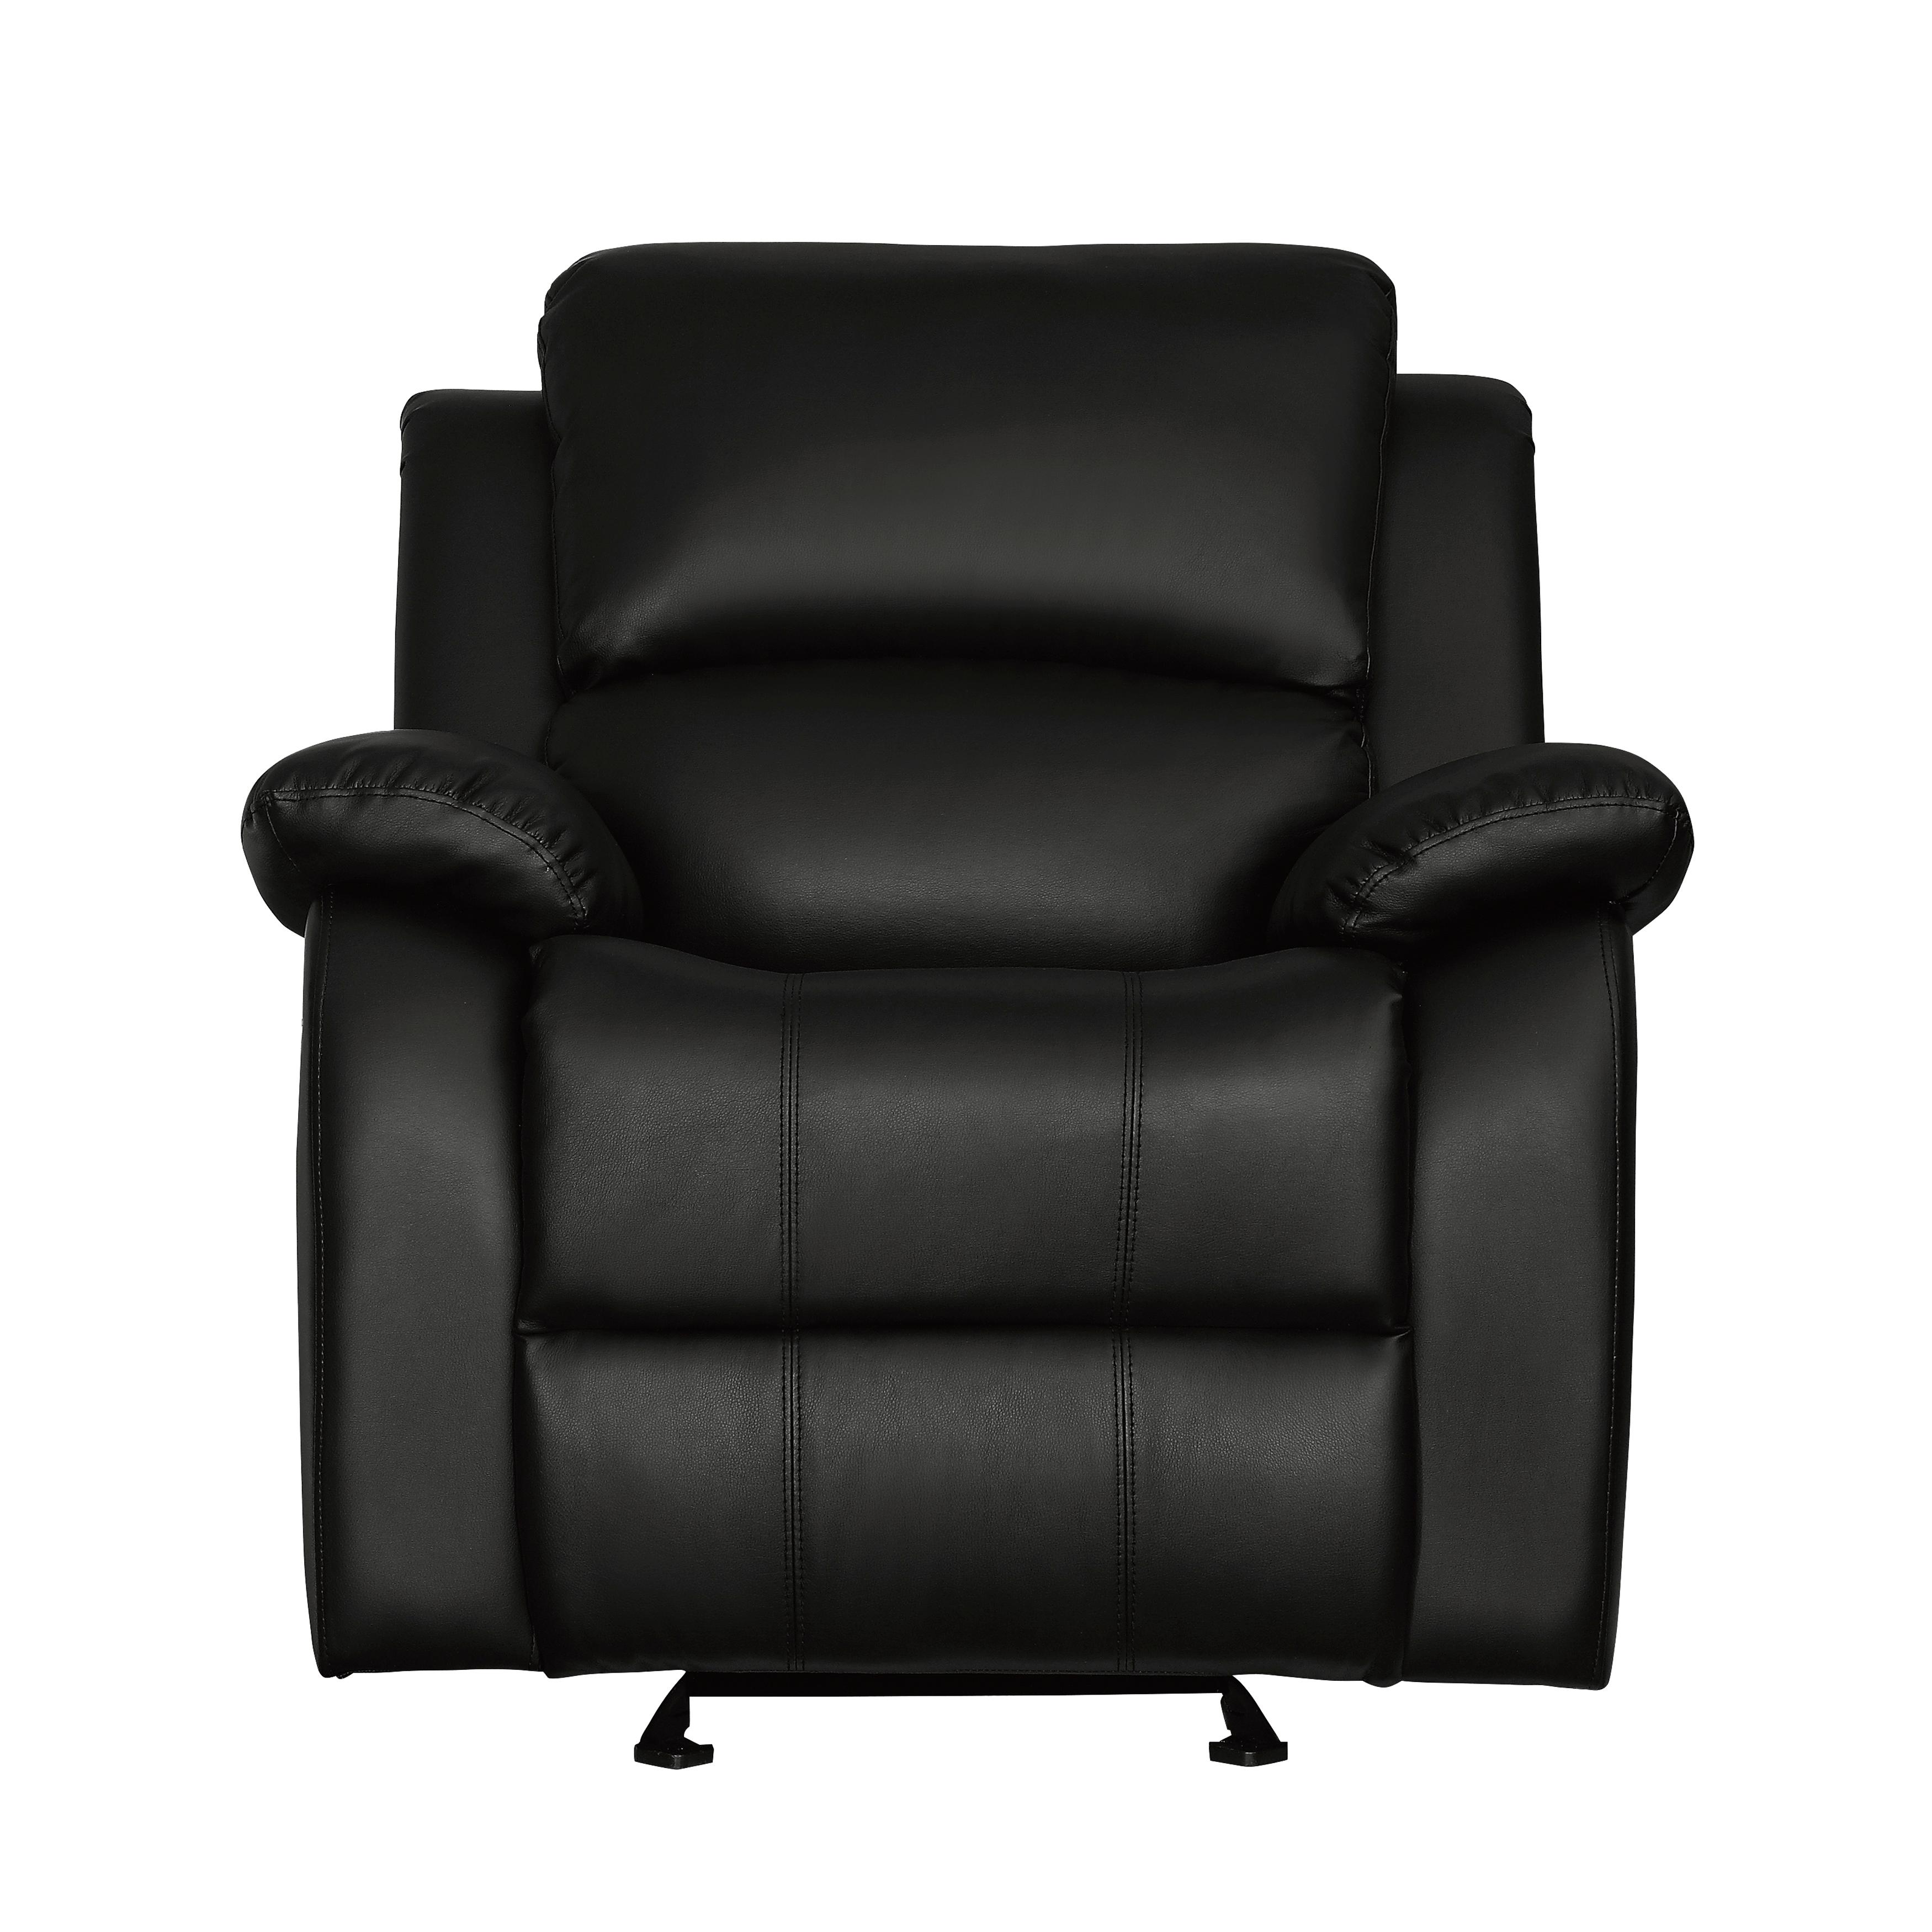 Transitional Reclining Chair 9928BLK-1 Clarkdale 9928BLK-1 in Black Faux Leather